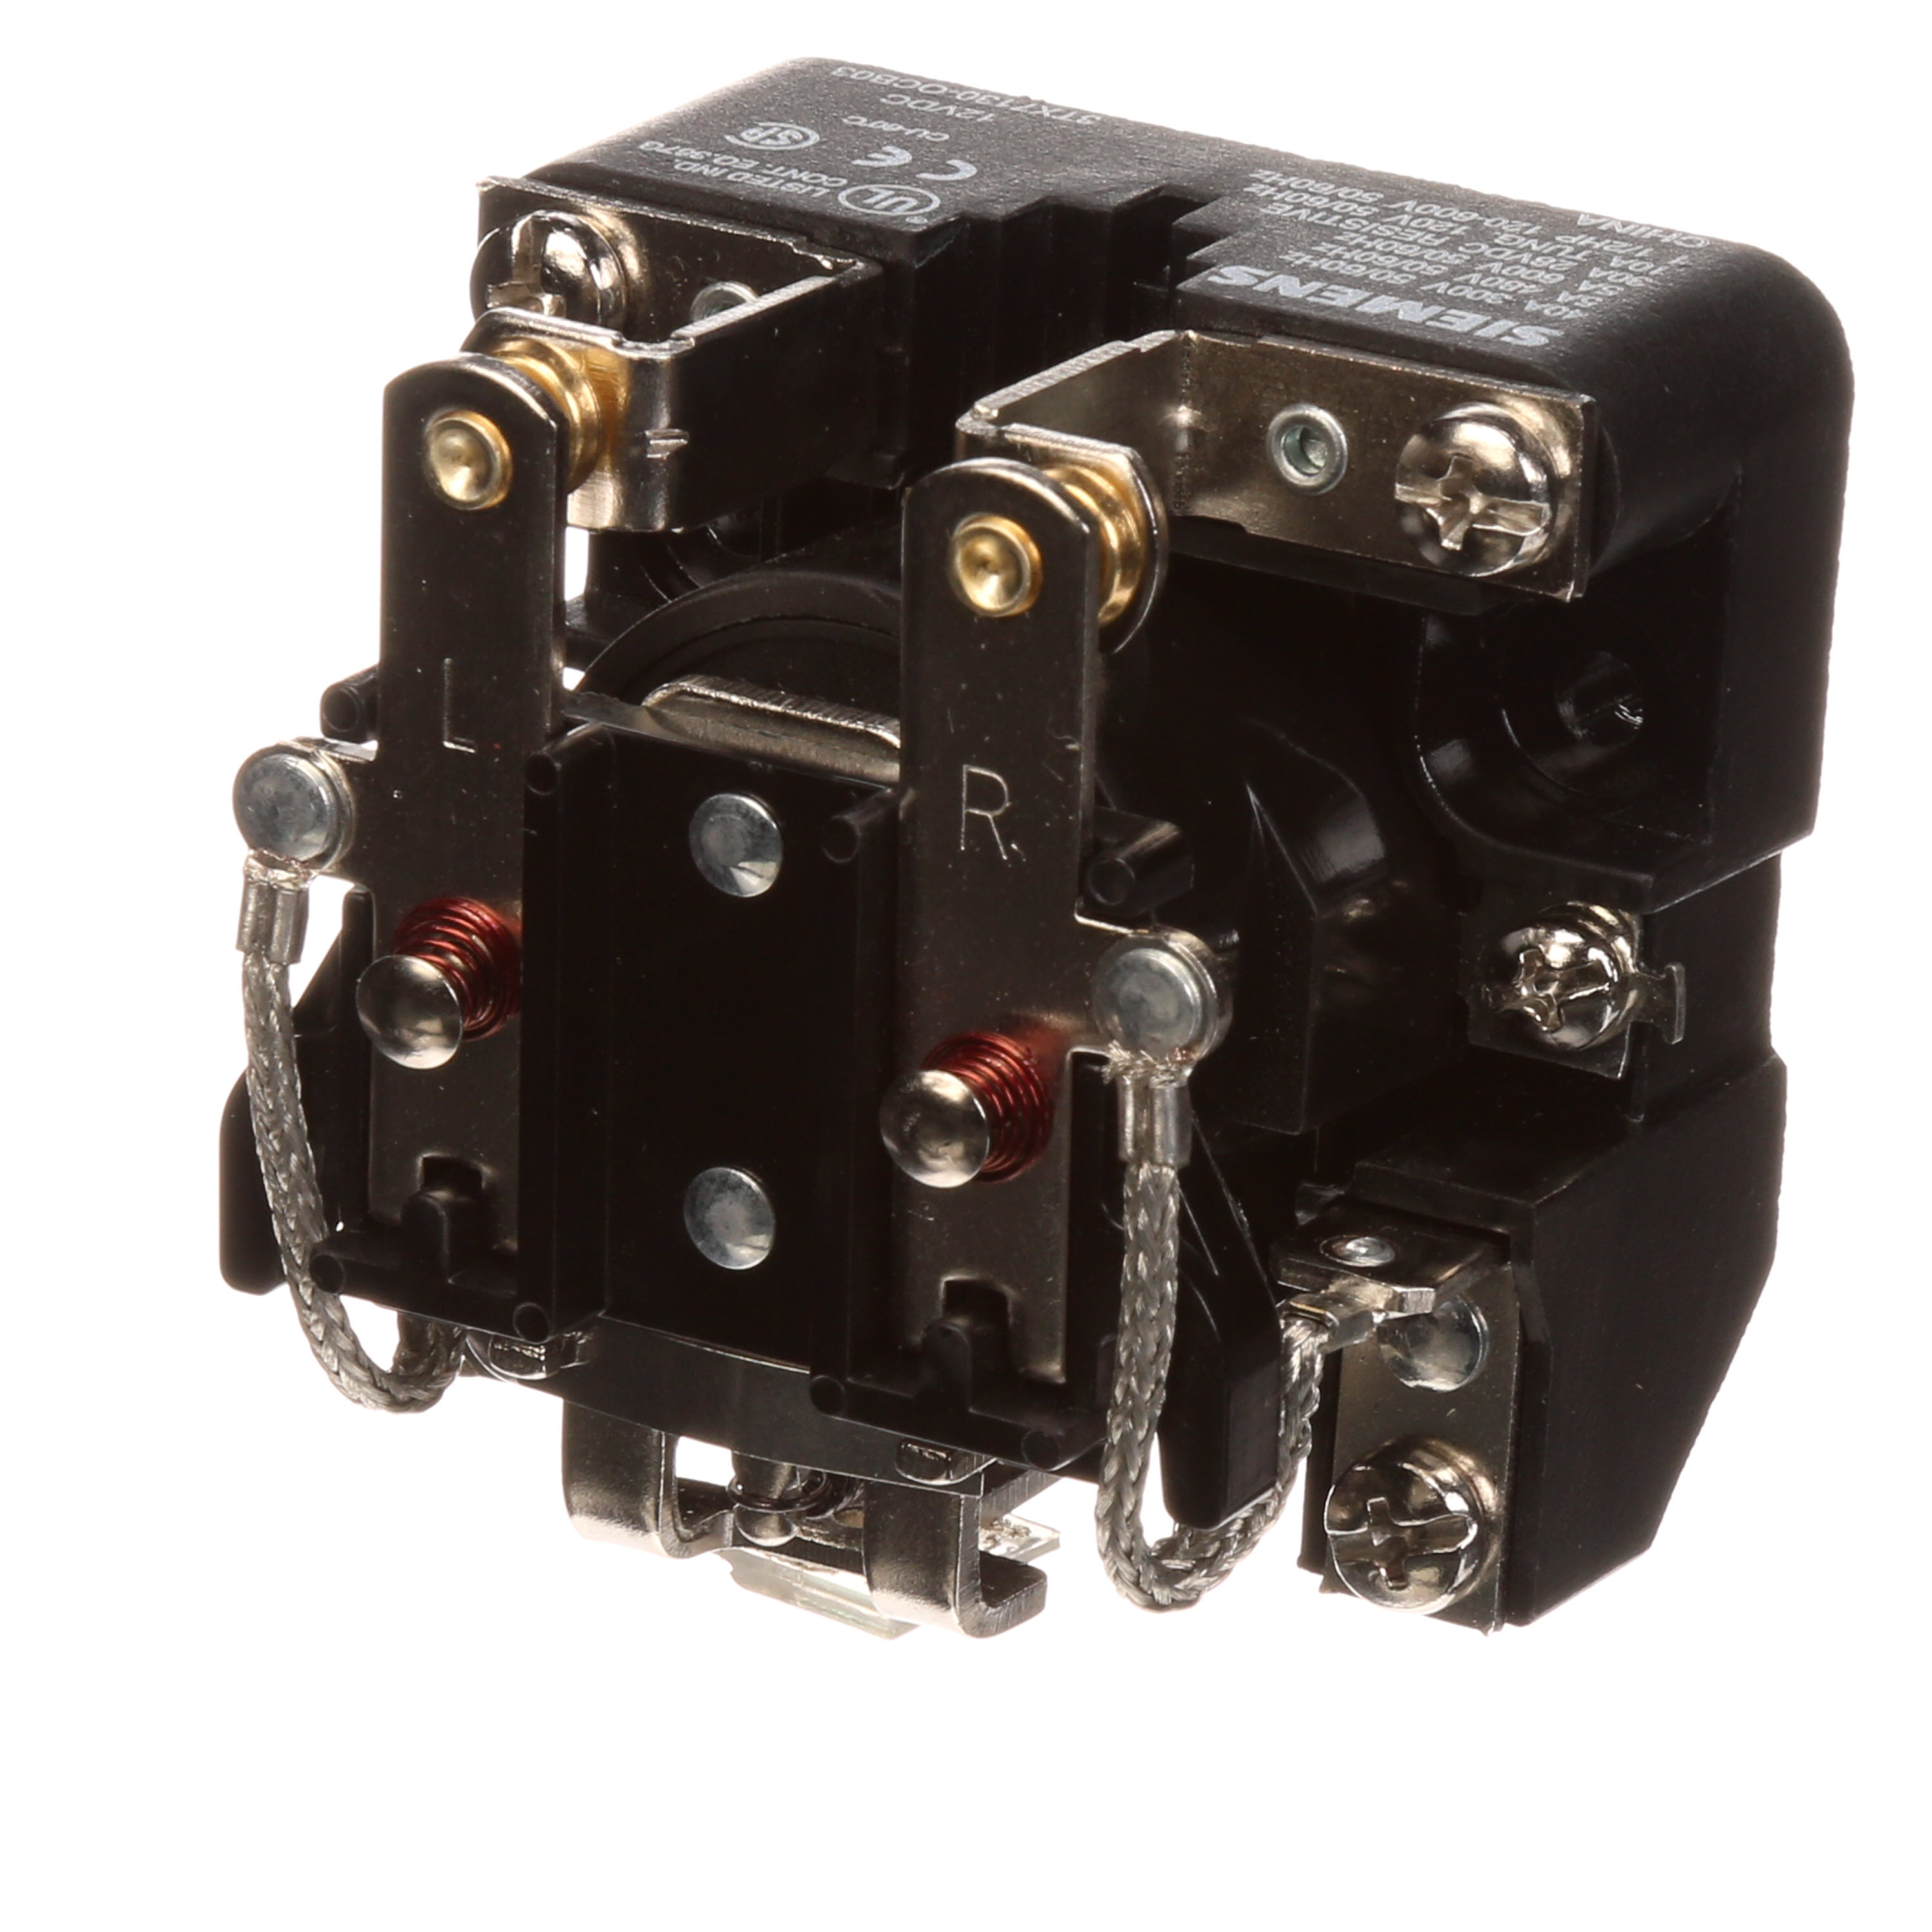 Open Power Relay Heavy Duty DPST-NO, 40A, 12VDC Optional Metal Cover 3TX7144-1M0